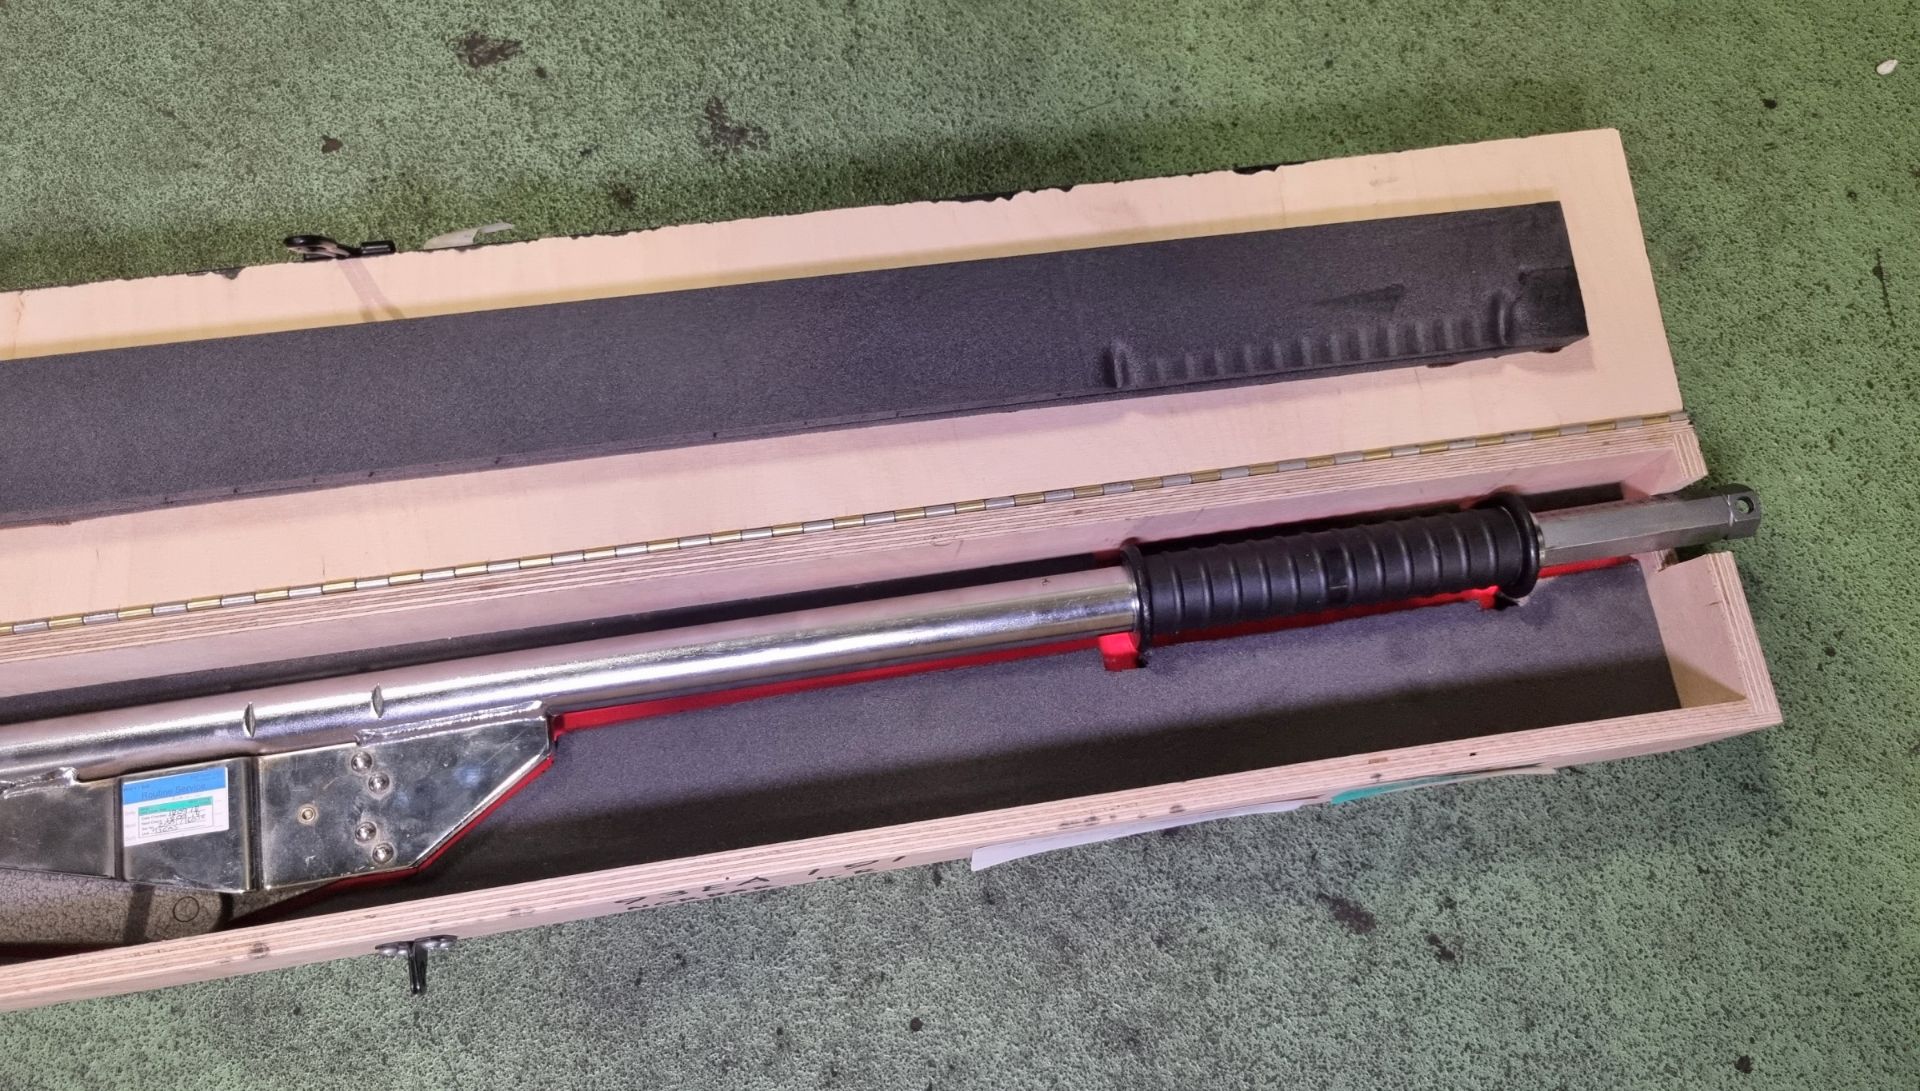 Norbar Industrial 4R, 3/4 inch torque wrench - wooden box - Image 3 of 5